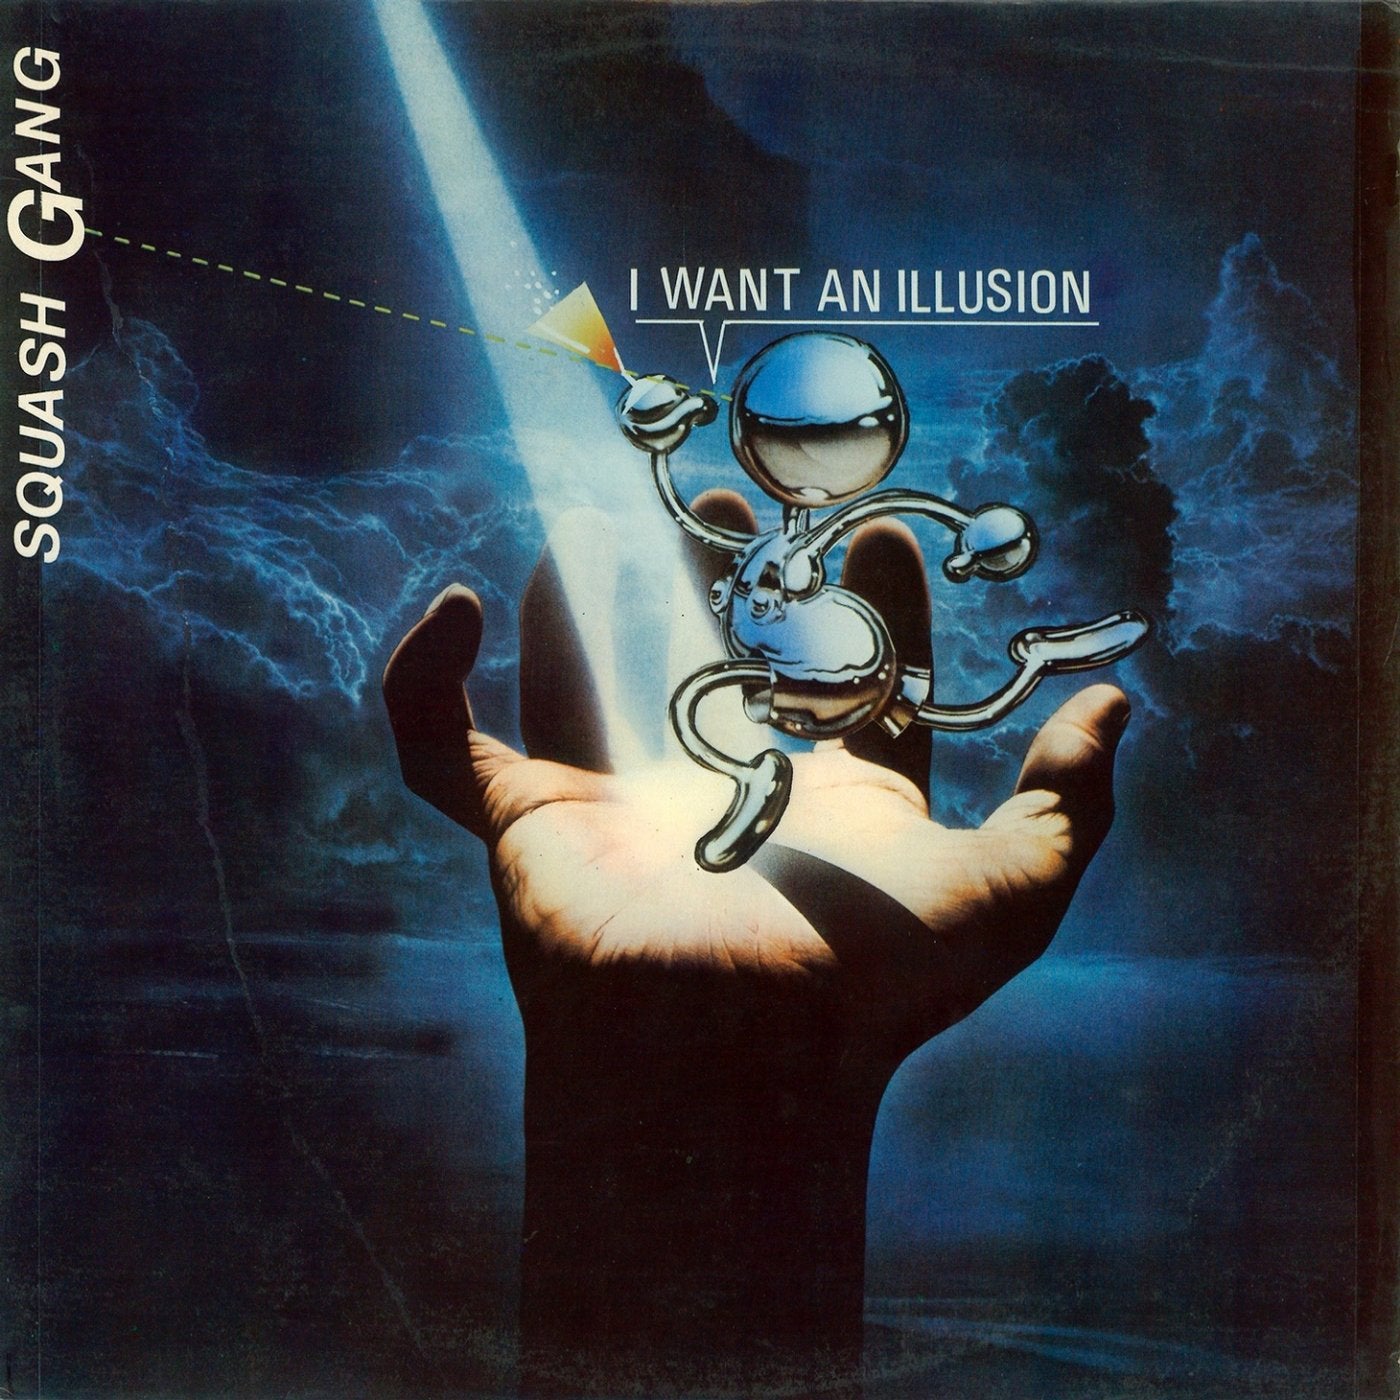 I Want an Illusion